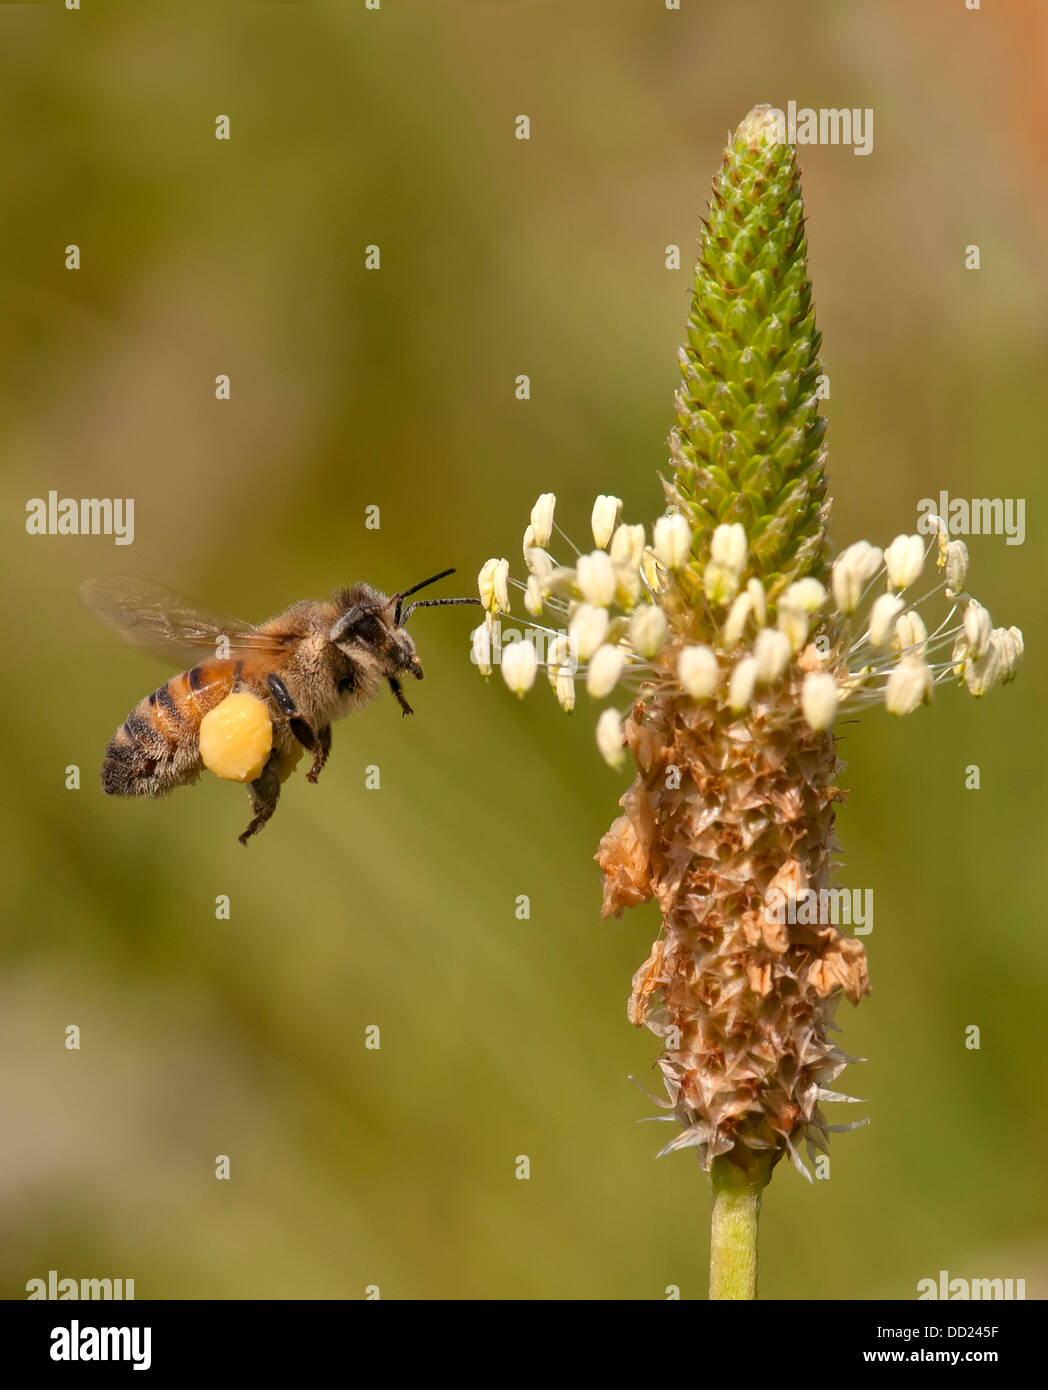 Bee fly with pollen Collected from flowers Stock Photo